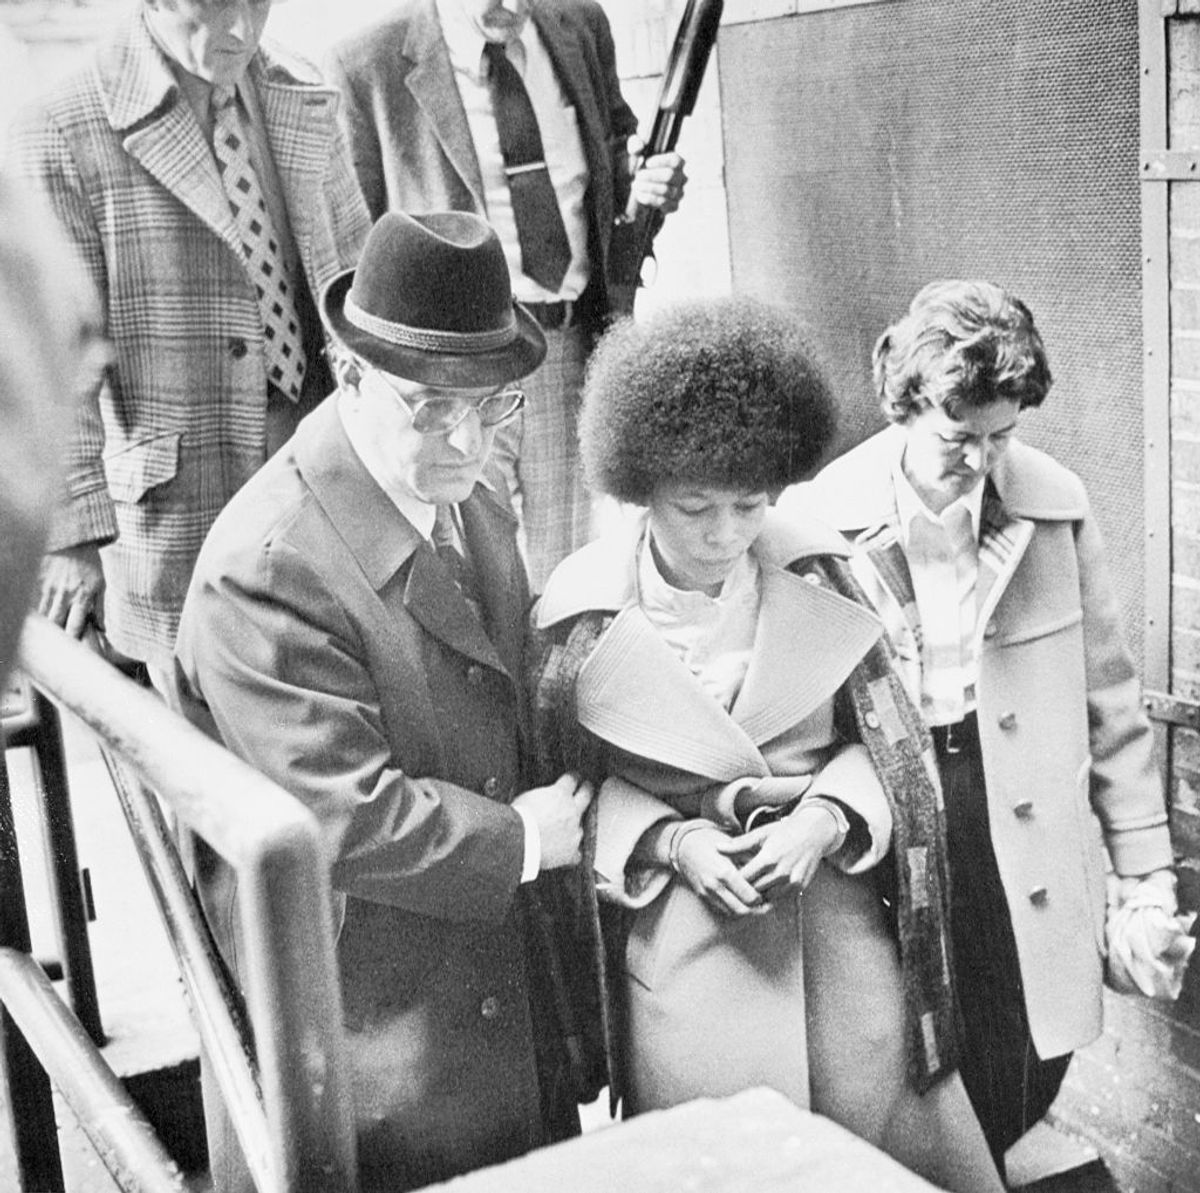 (Original Caption) New Brunswick, N.J.: Reputed black militant leader Joanna Chesimard leaves Middlesex County court April 25, escorted by County Sheriff Joseph DeMarino (light coat) after Miss Chesimard was sentenced to 26 to 33 years on various assault, weapons and robbery charges in connection with the 1973 murder of a New Jersey State trooper. Miss Chesimard is currently serving a life sentence for the murder conviction.